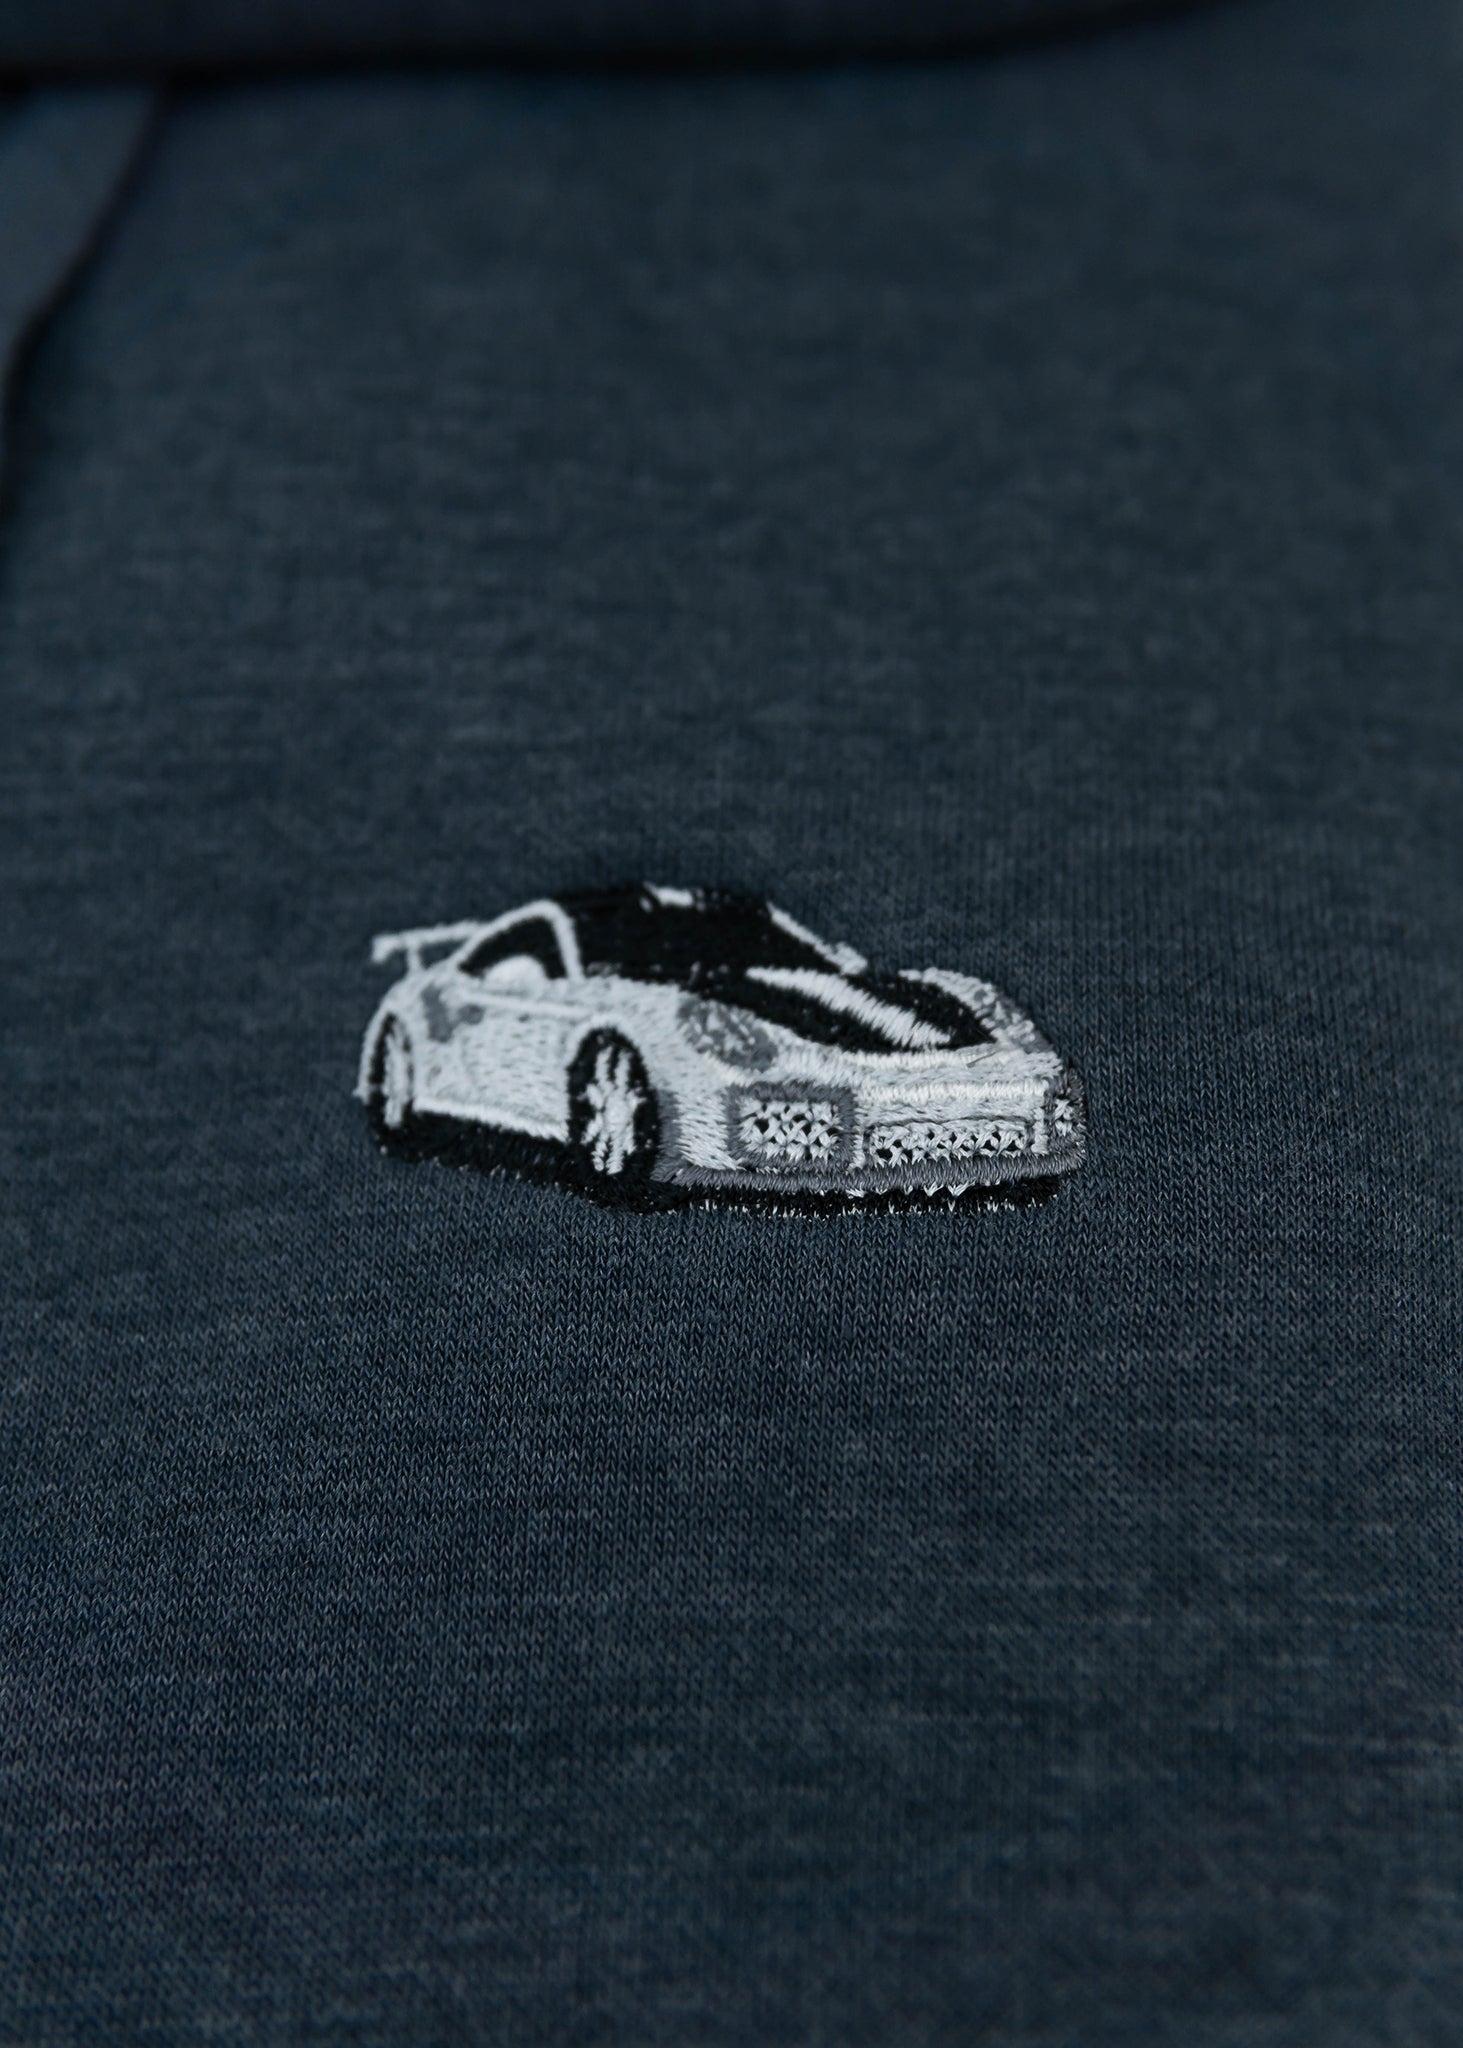 Close up of an embroidered GT2 RS on a navy blue unisex hoodie for men and women. Photo shows the high quality detailed embroidery of a white, silver, carbon fiber GT2 RS on the left chest. Fabric composition of the sweater is cotton, polyester, and rayon. The material is very soft, stretchy, and non-transparent. The style of this hoodie is long sleeve, crewneck with a hood, hooded, with embroidery on the left chest.